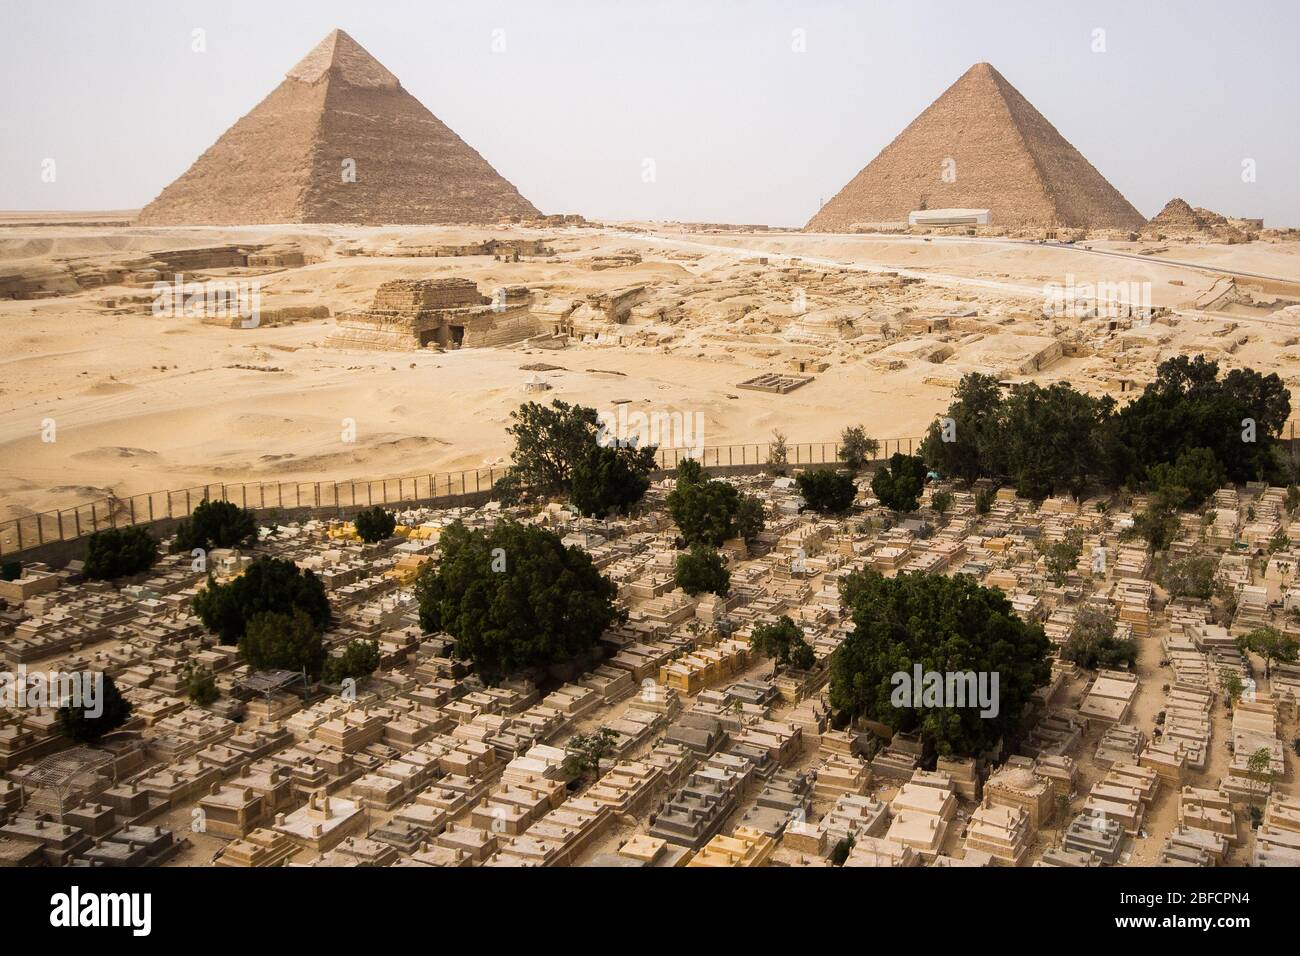 Modern local cemetery in from of the Great Pyramids at Giza, Egypt. Stock Photo